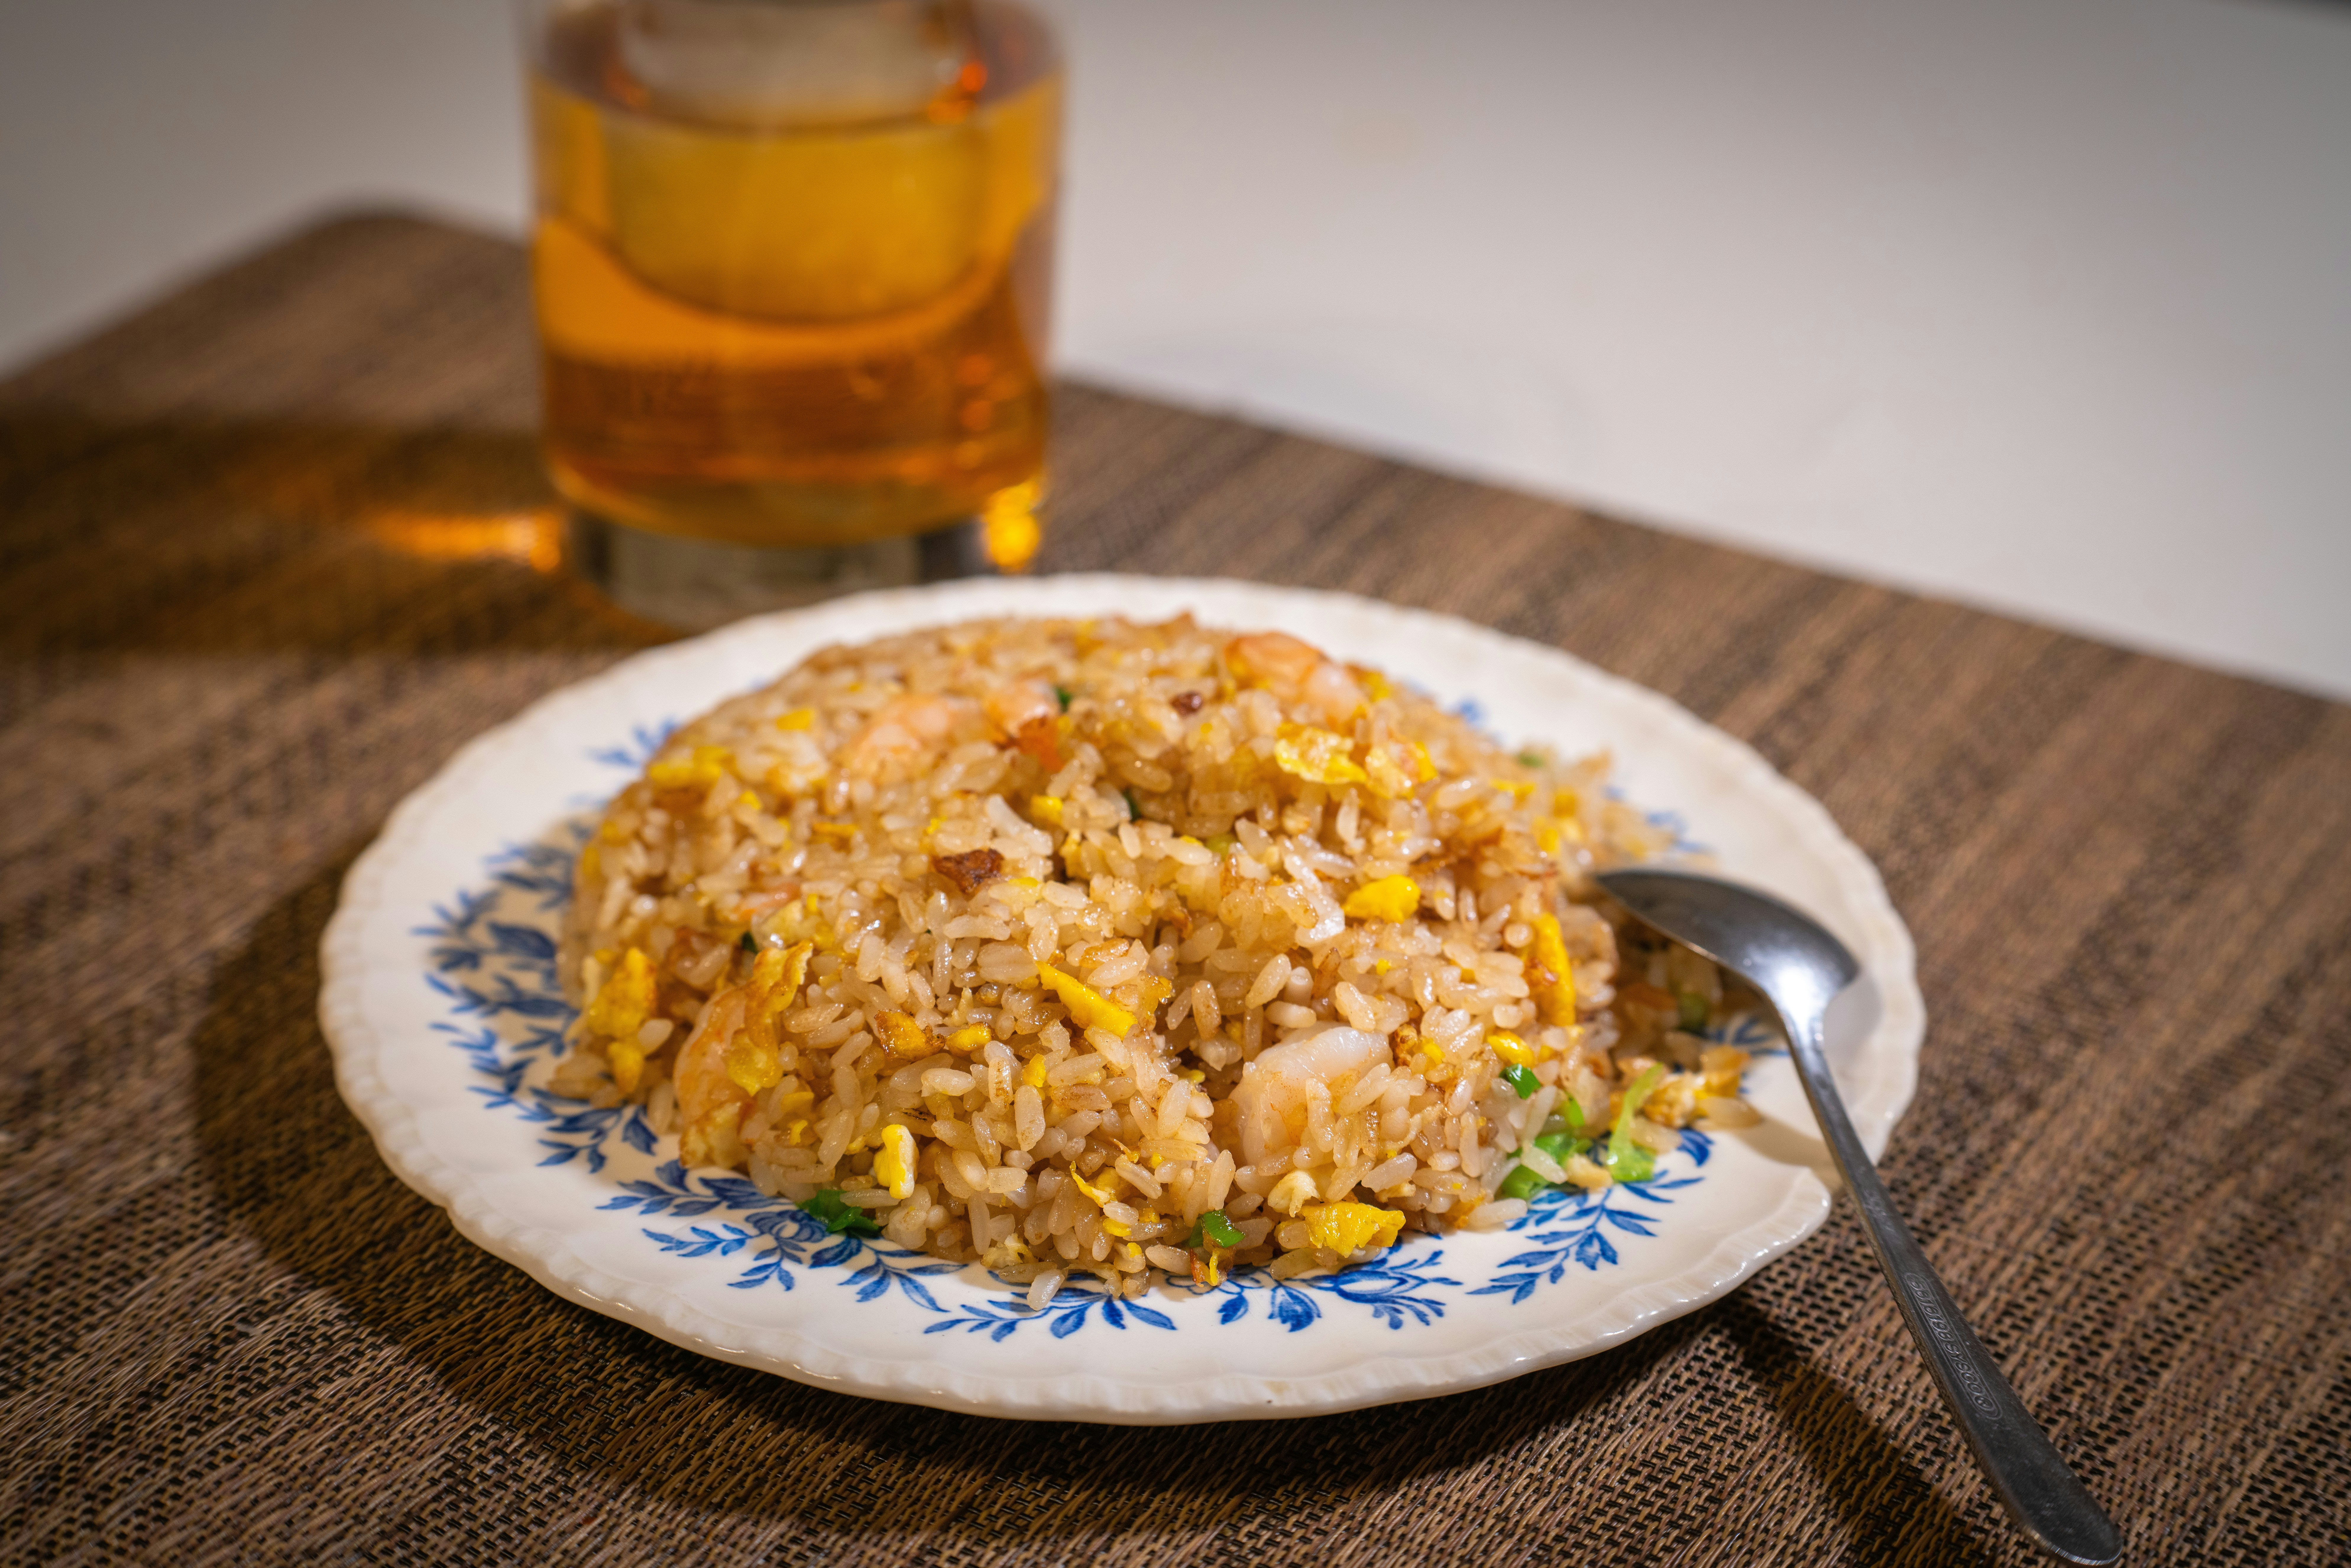 Do a hibachi style dinner for an easy and quick sunday dinner idea. Pictured: Fried rice